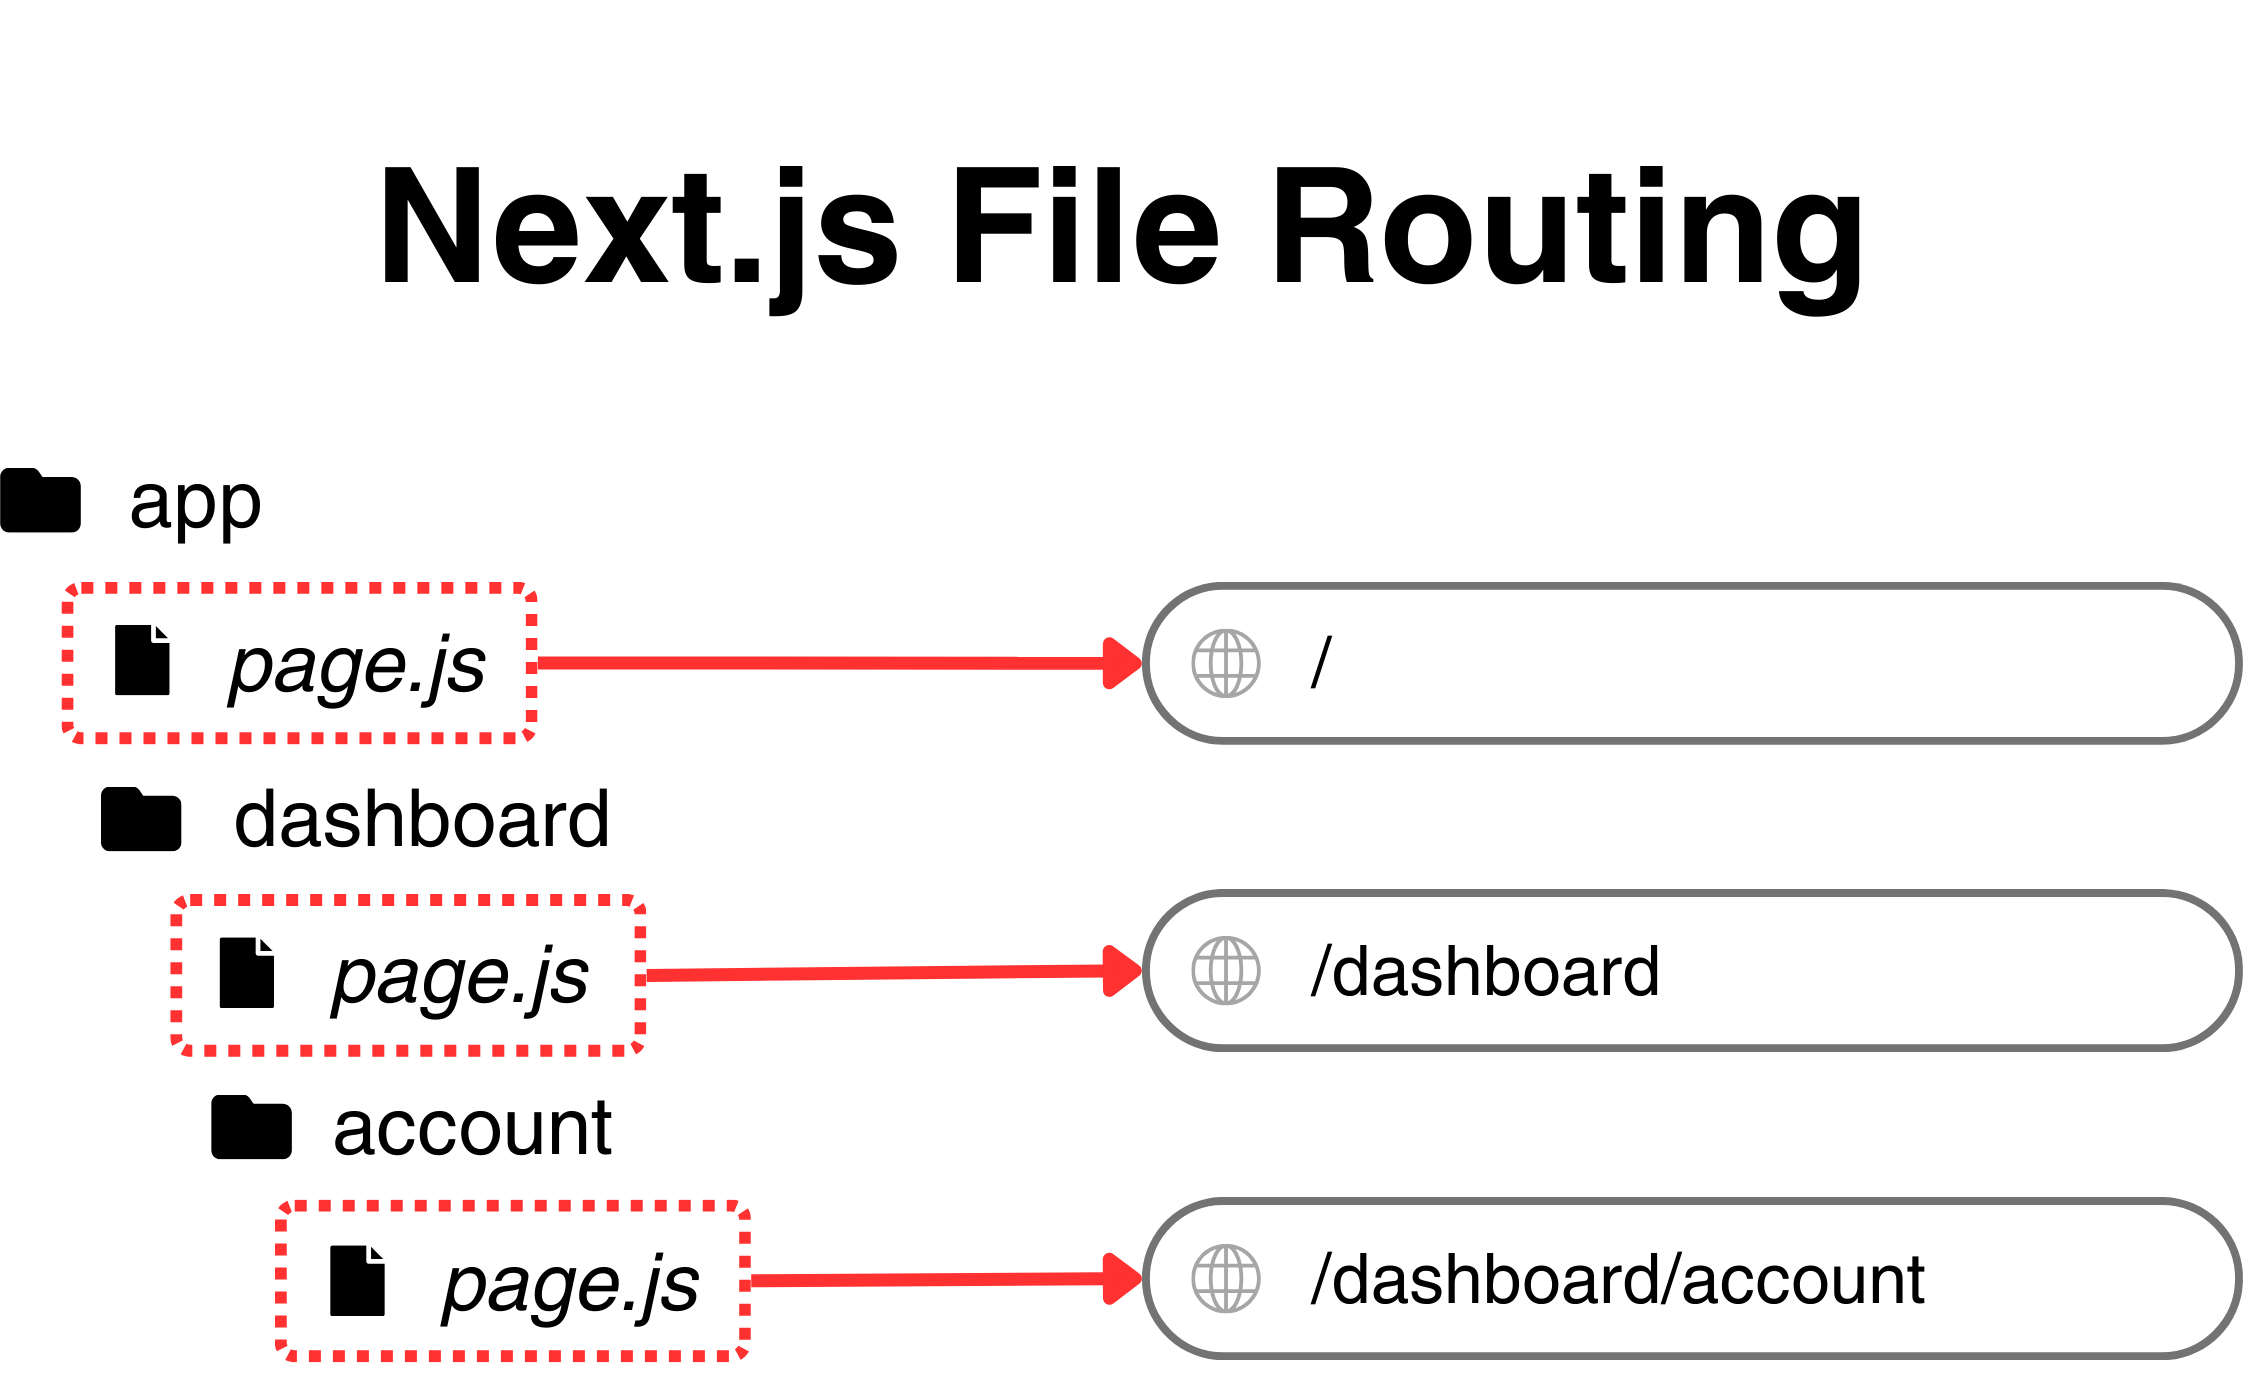 Diagram illustrating how the Next.js file router works